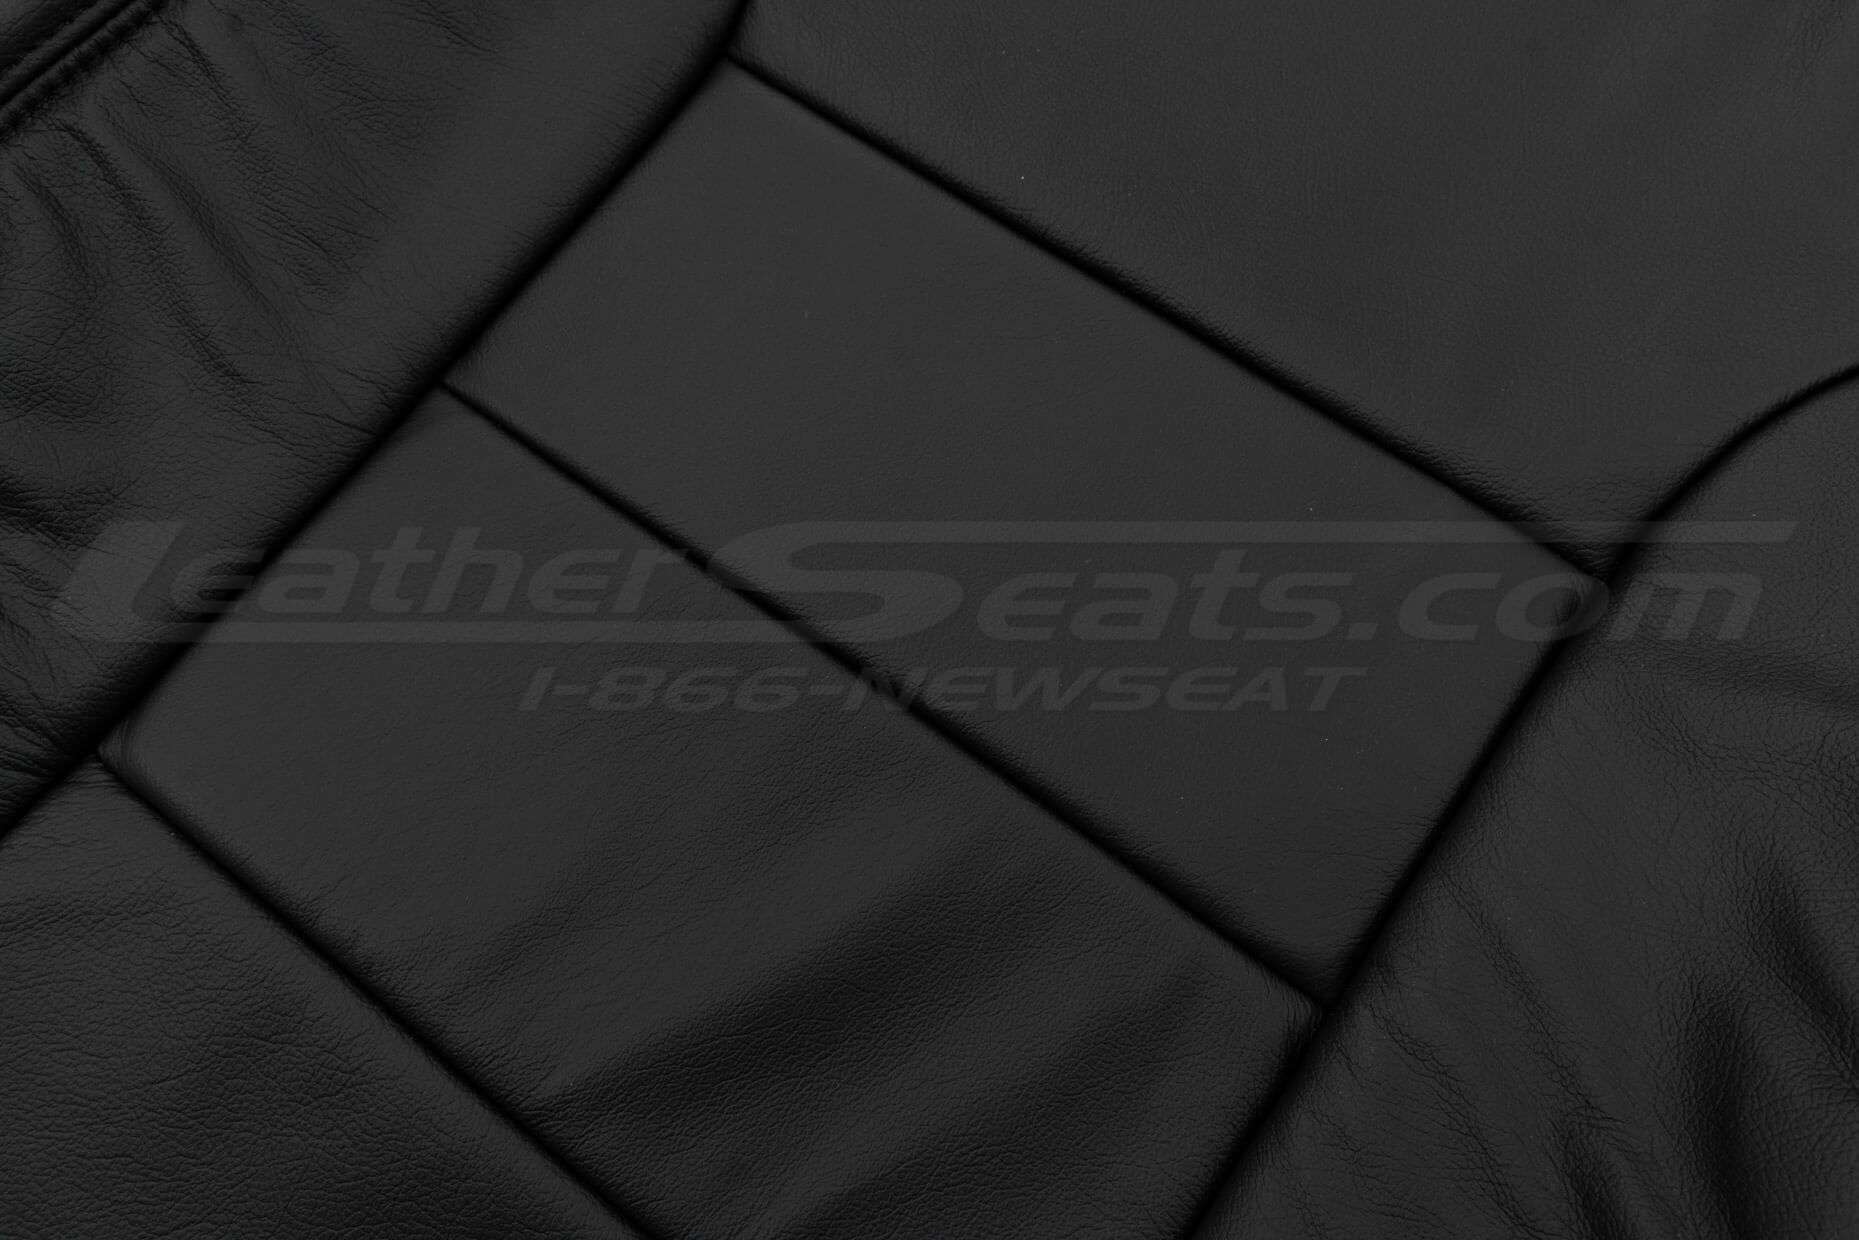 Leather texture of backrest insert section